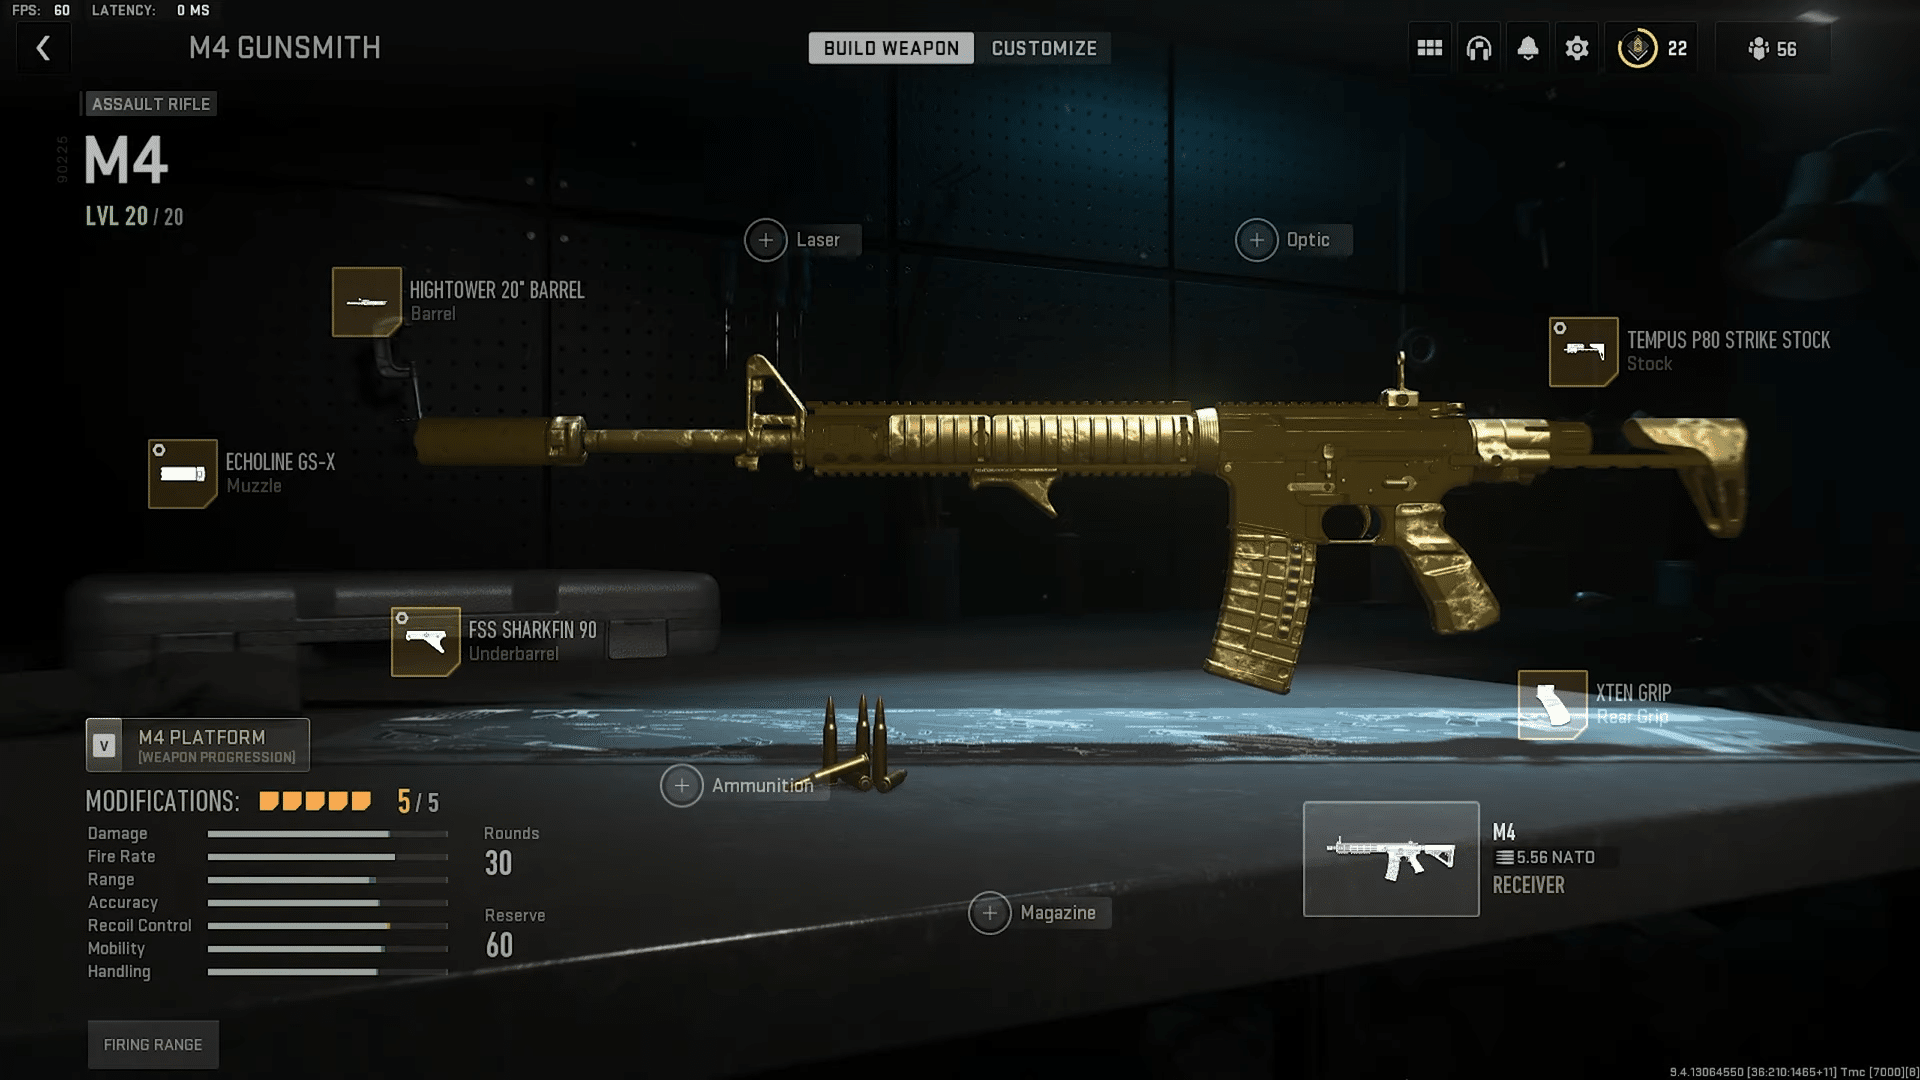 The M4 is one of the best ARs in the game